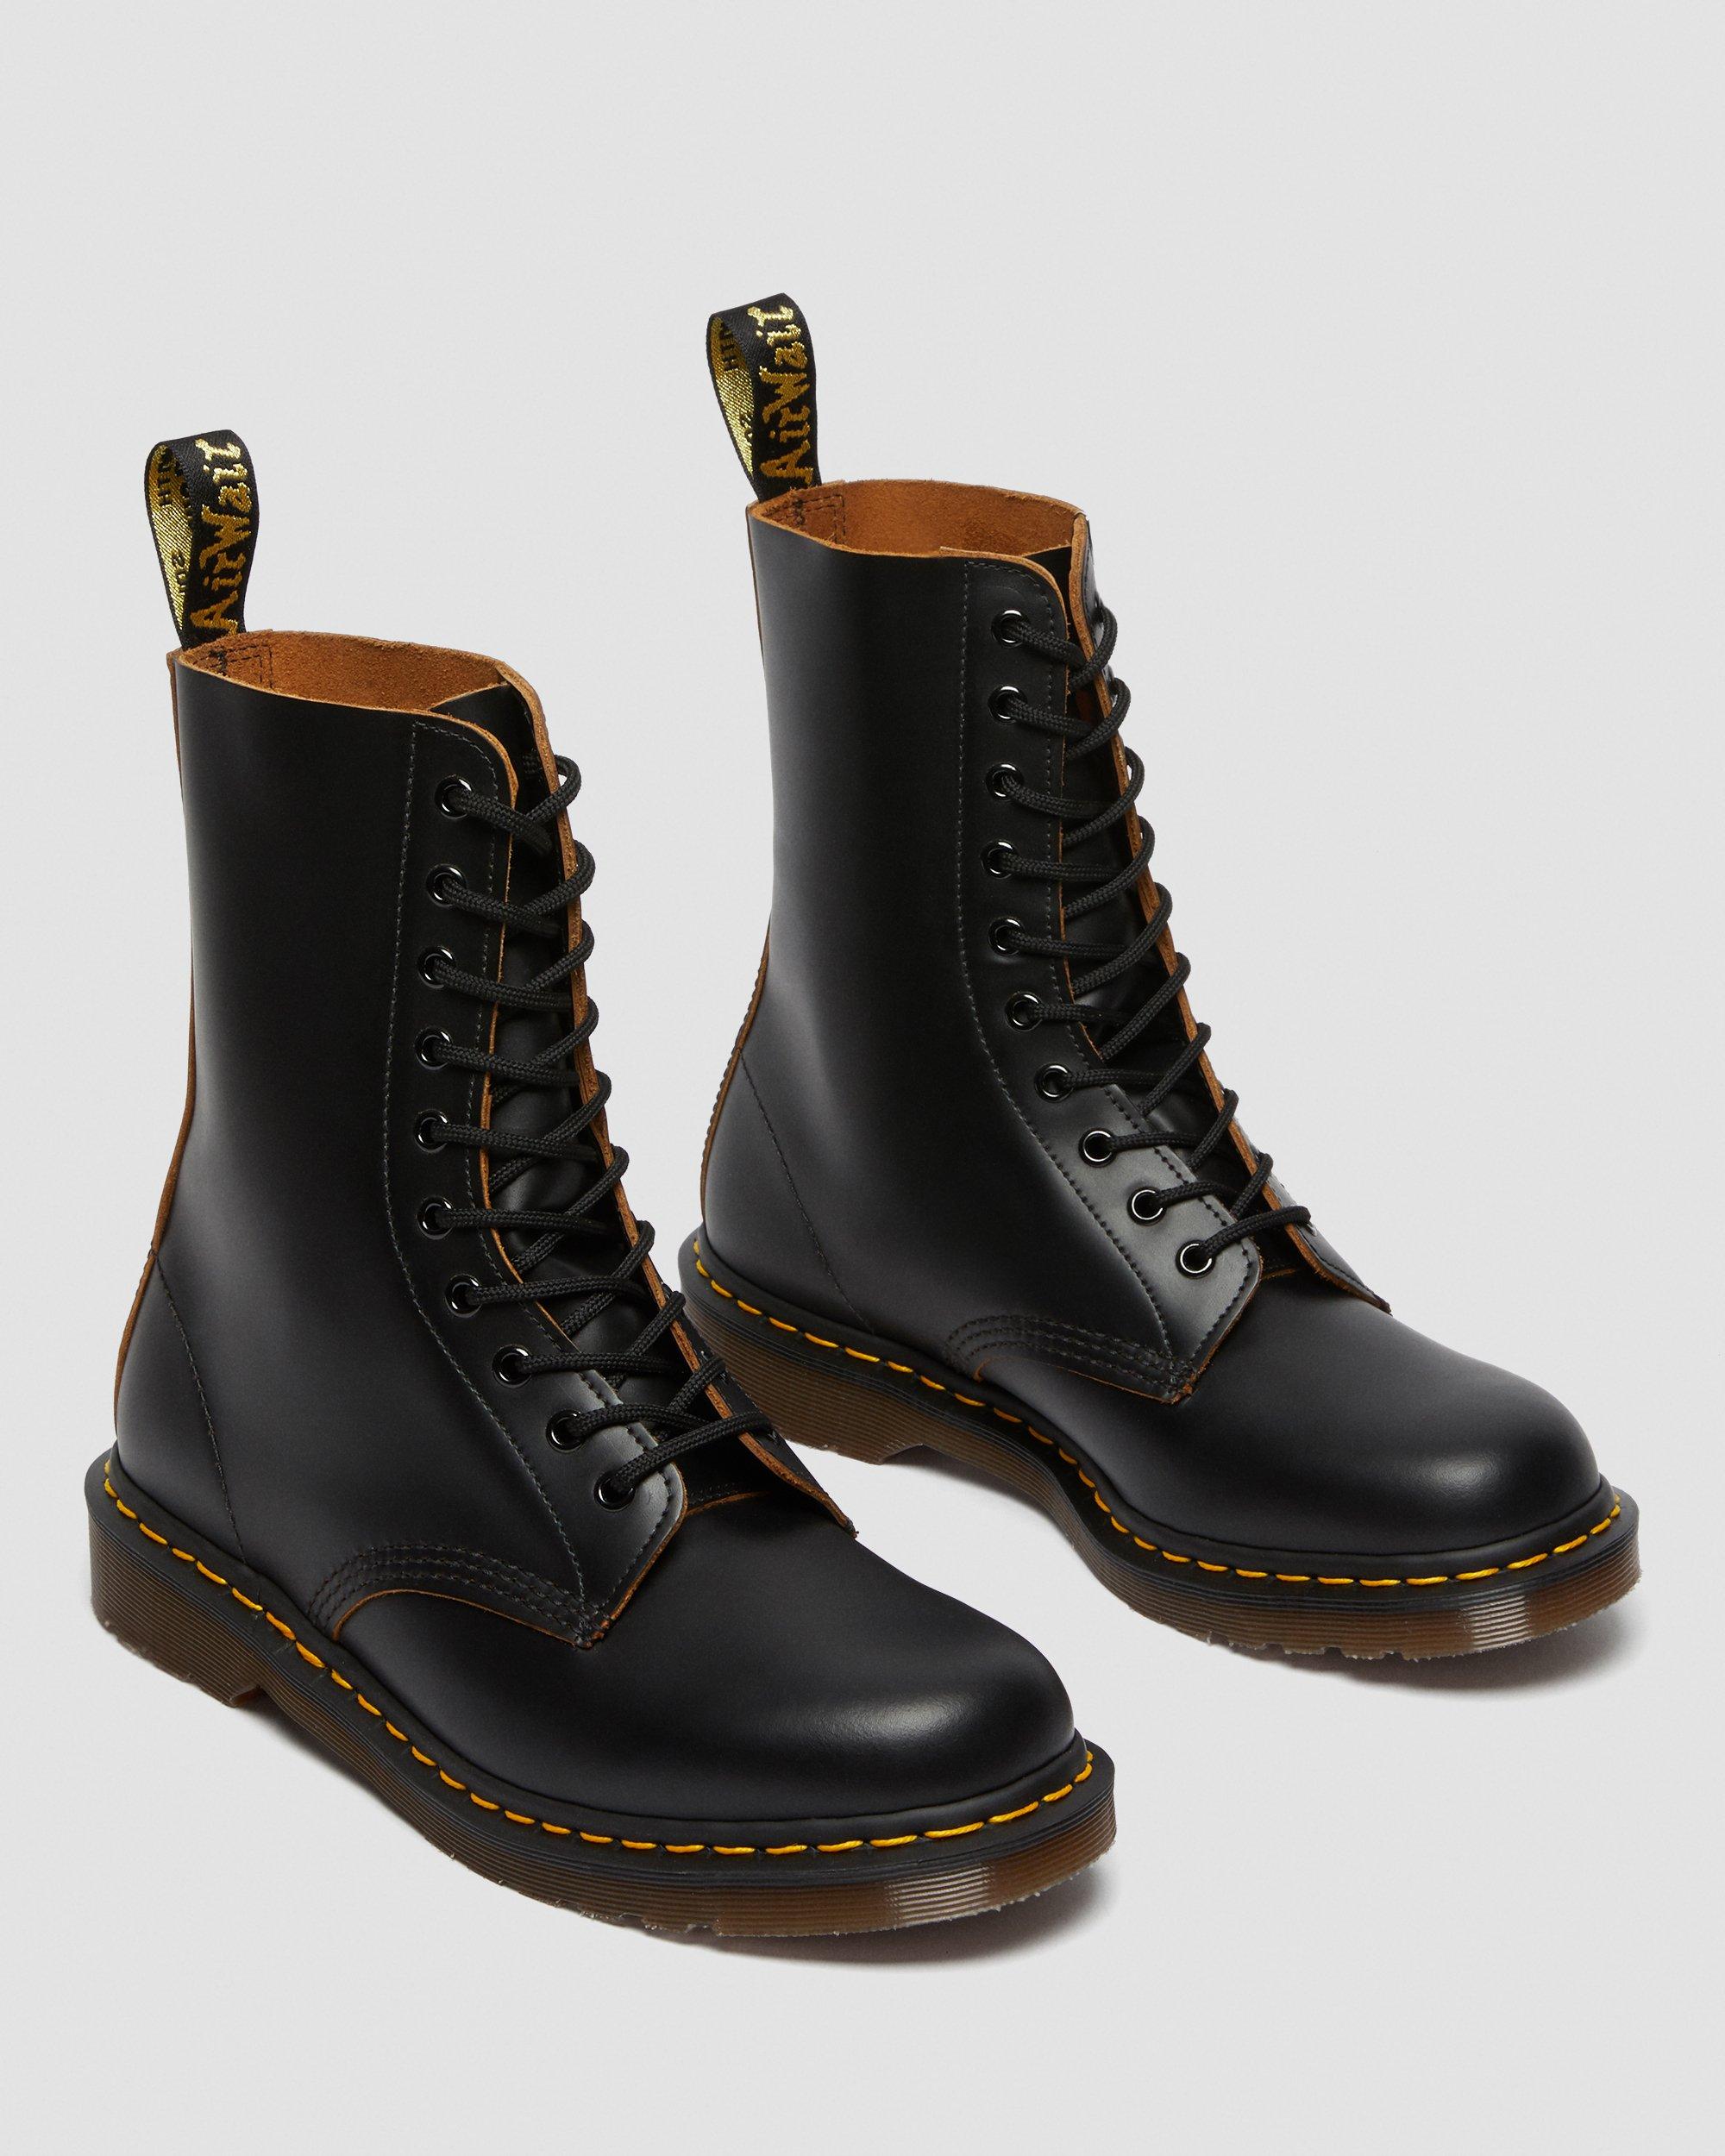 1490 VINTAGE MADE IN ENGLAND MID CALF BOOTS | Dr. Martens Official